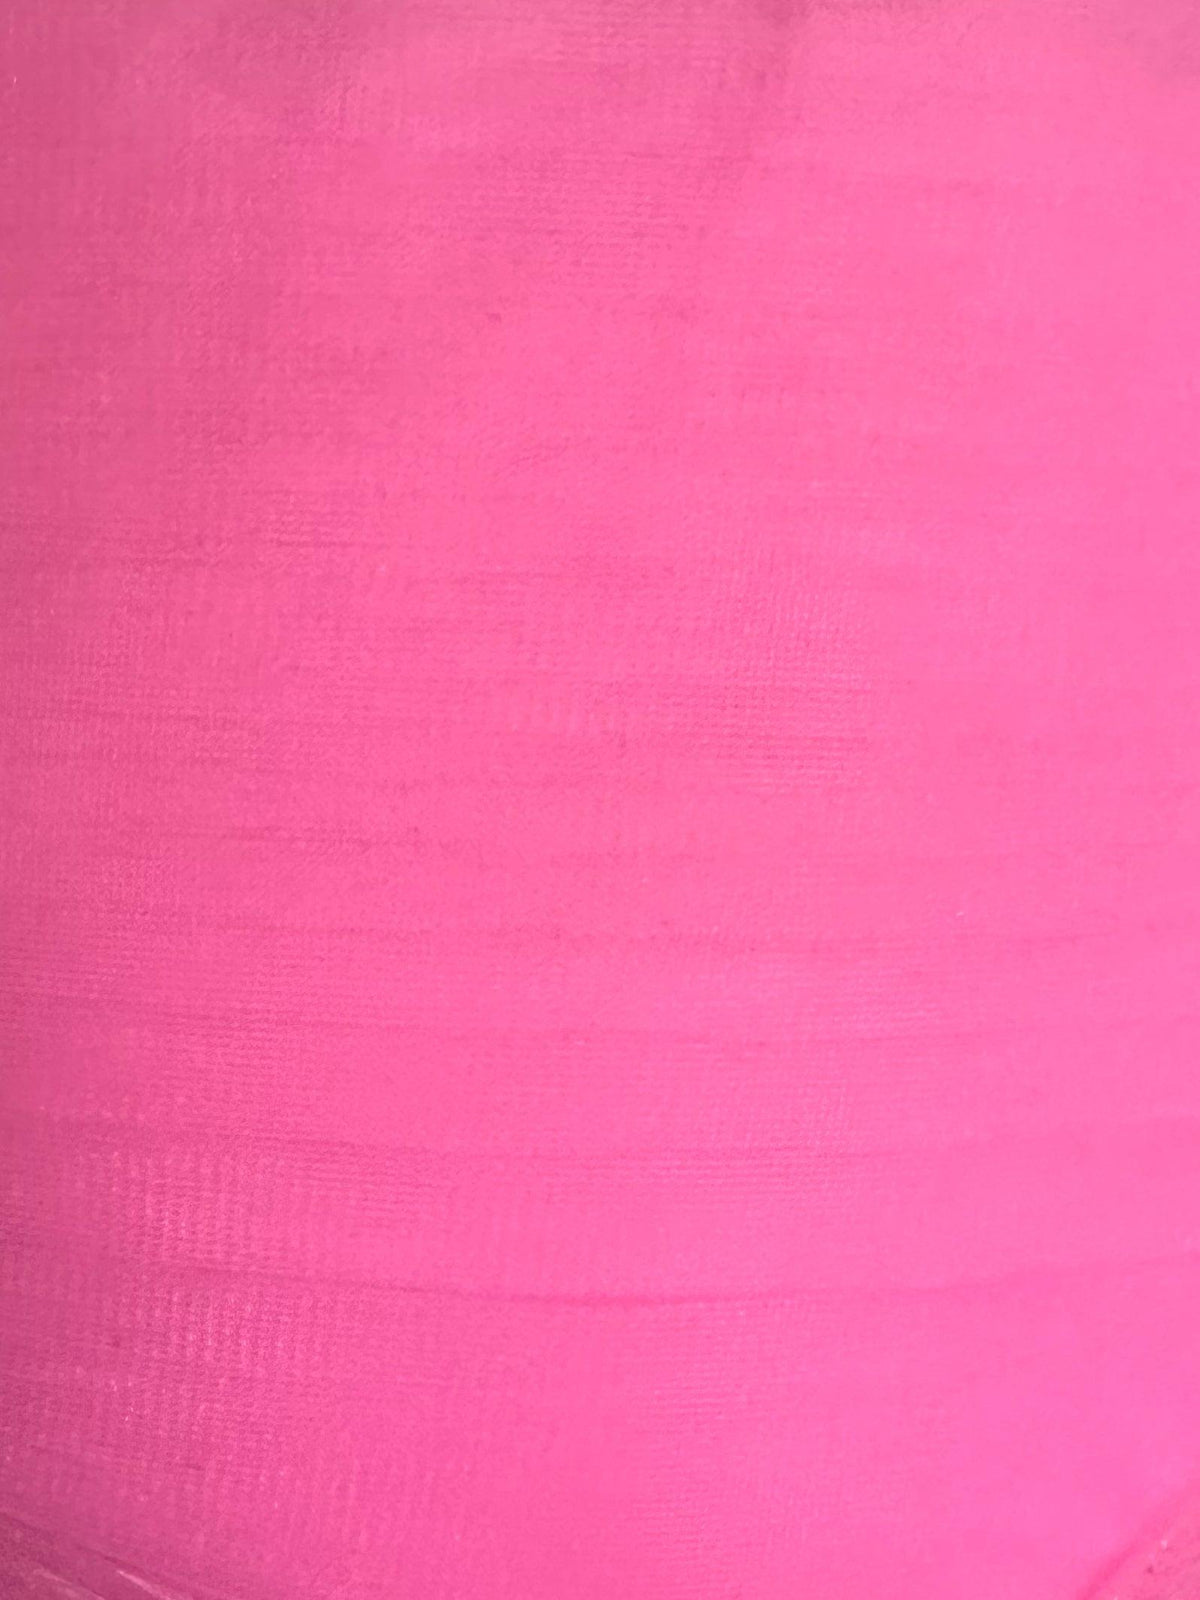 Close-up of a textured pink nylon &quot;Square Up Fashions&quot; Organdy Stiff Petticoat with visible horizontal weave patterns.